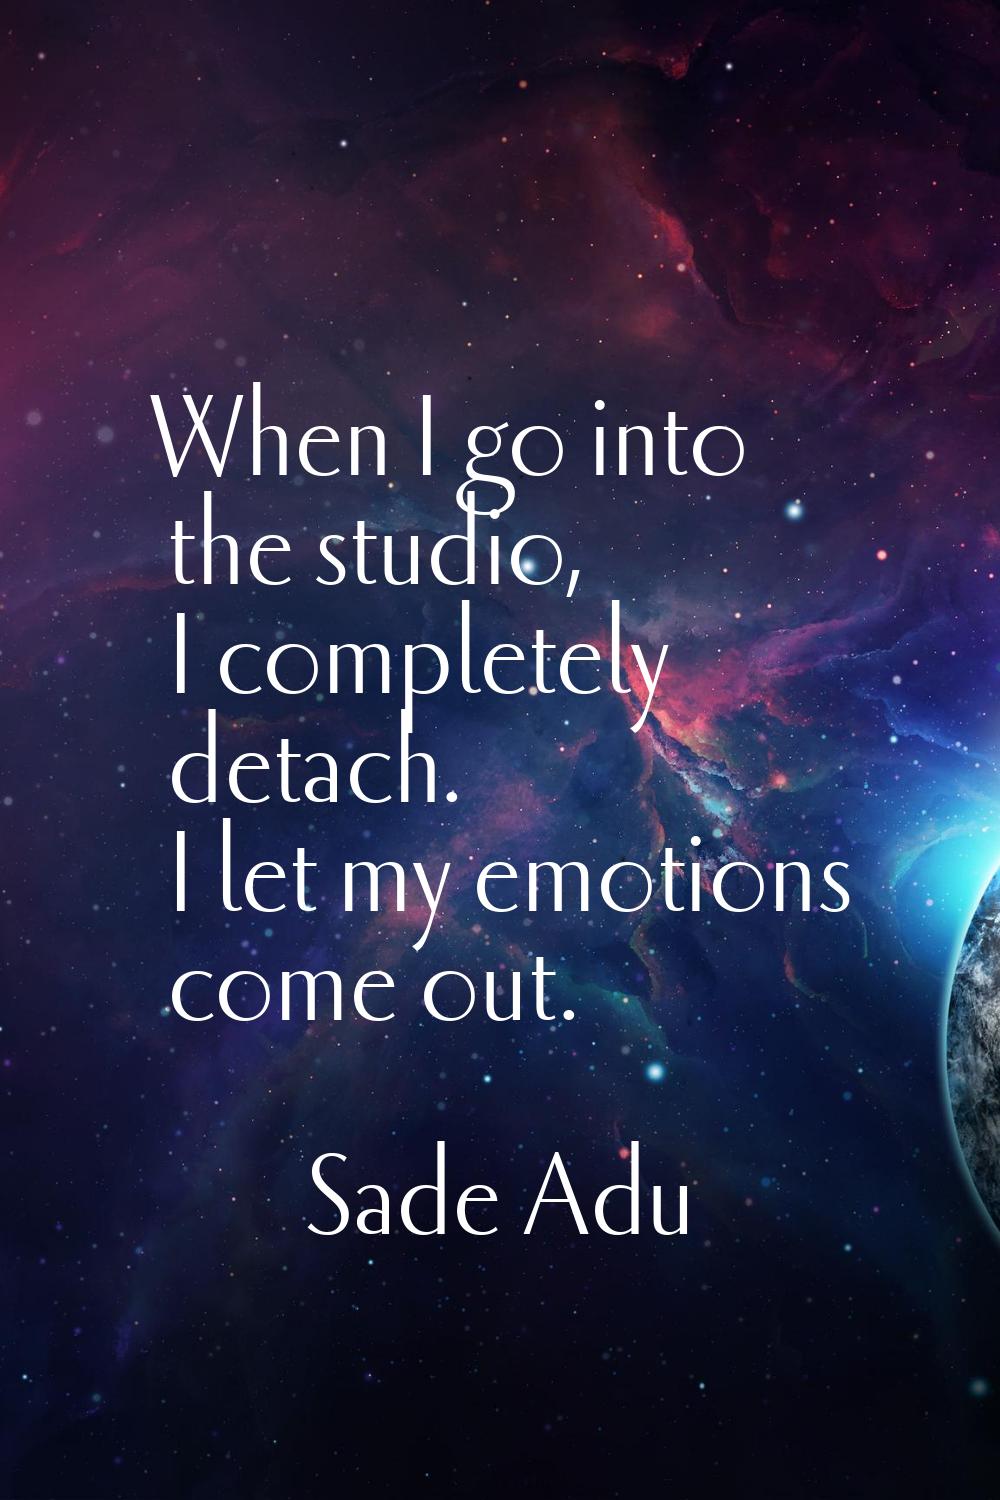 When I go into the studio, I completely detach. I let my emotions come out.